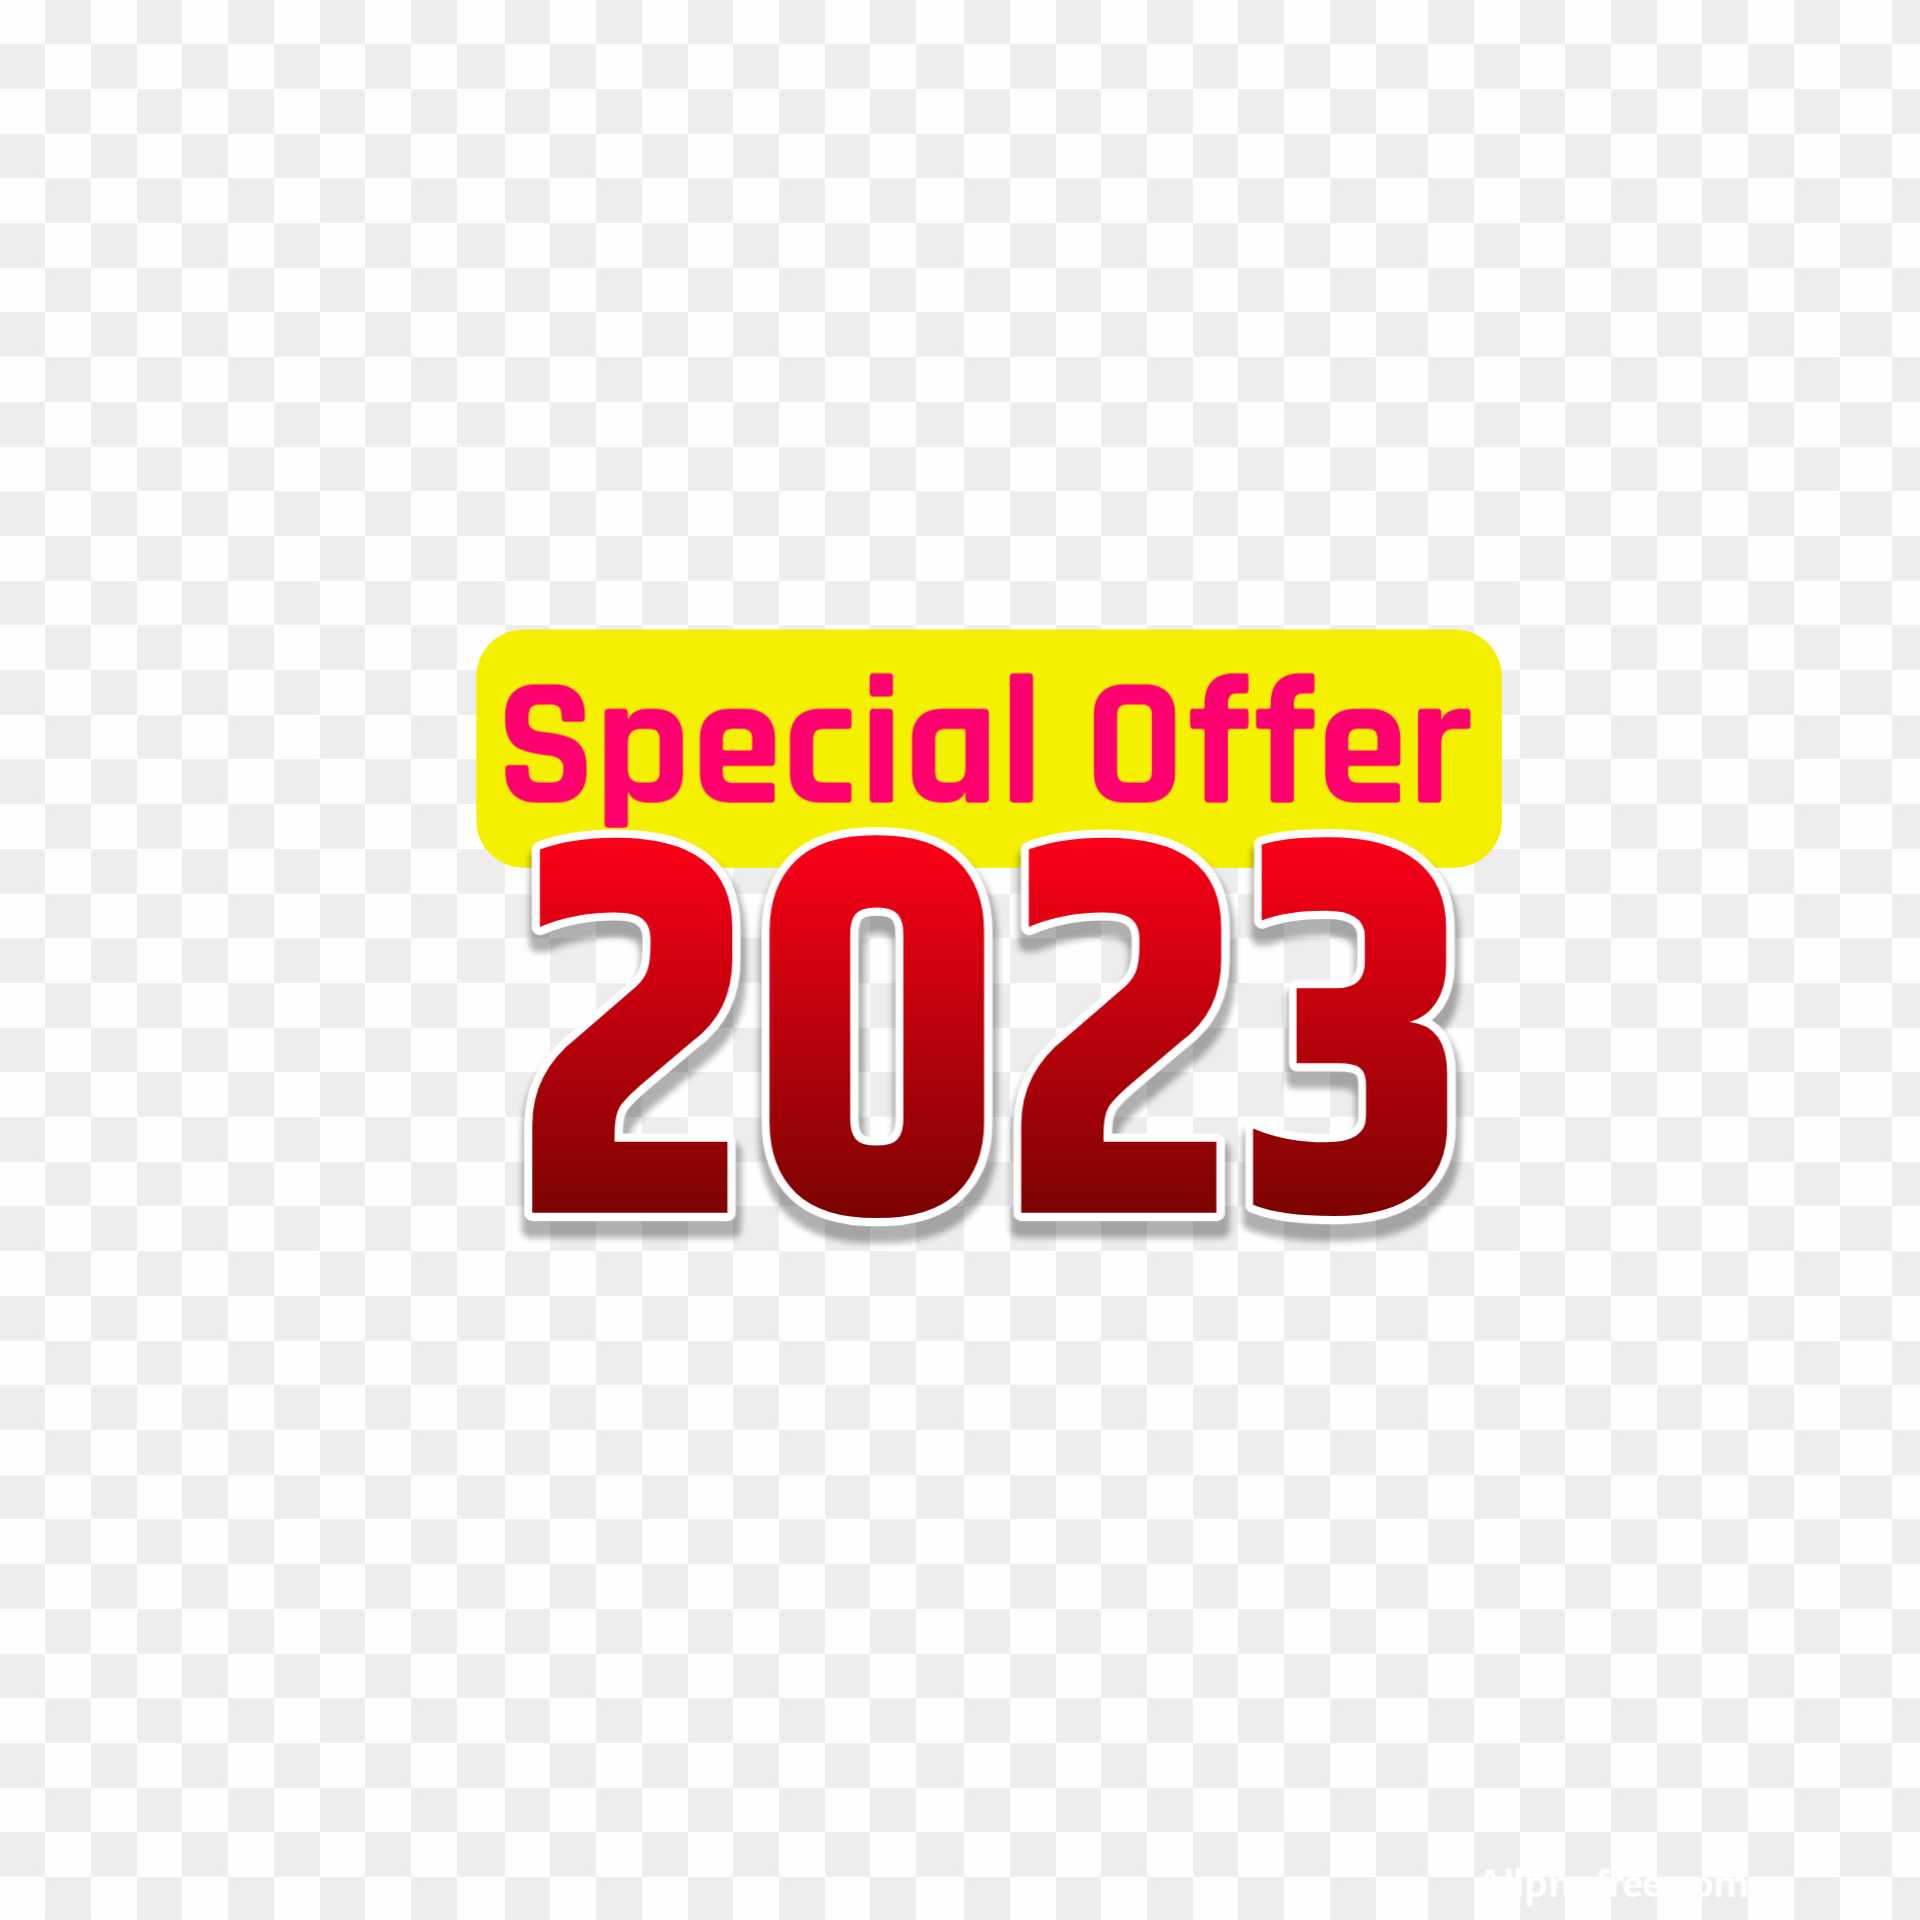 Special Offer 2023 png images 